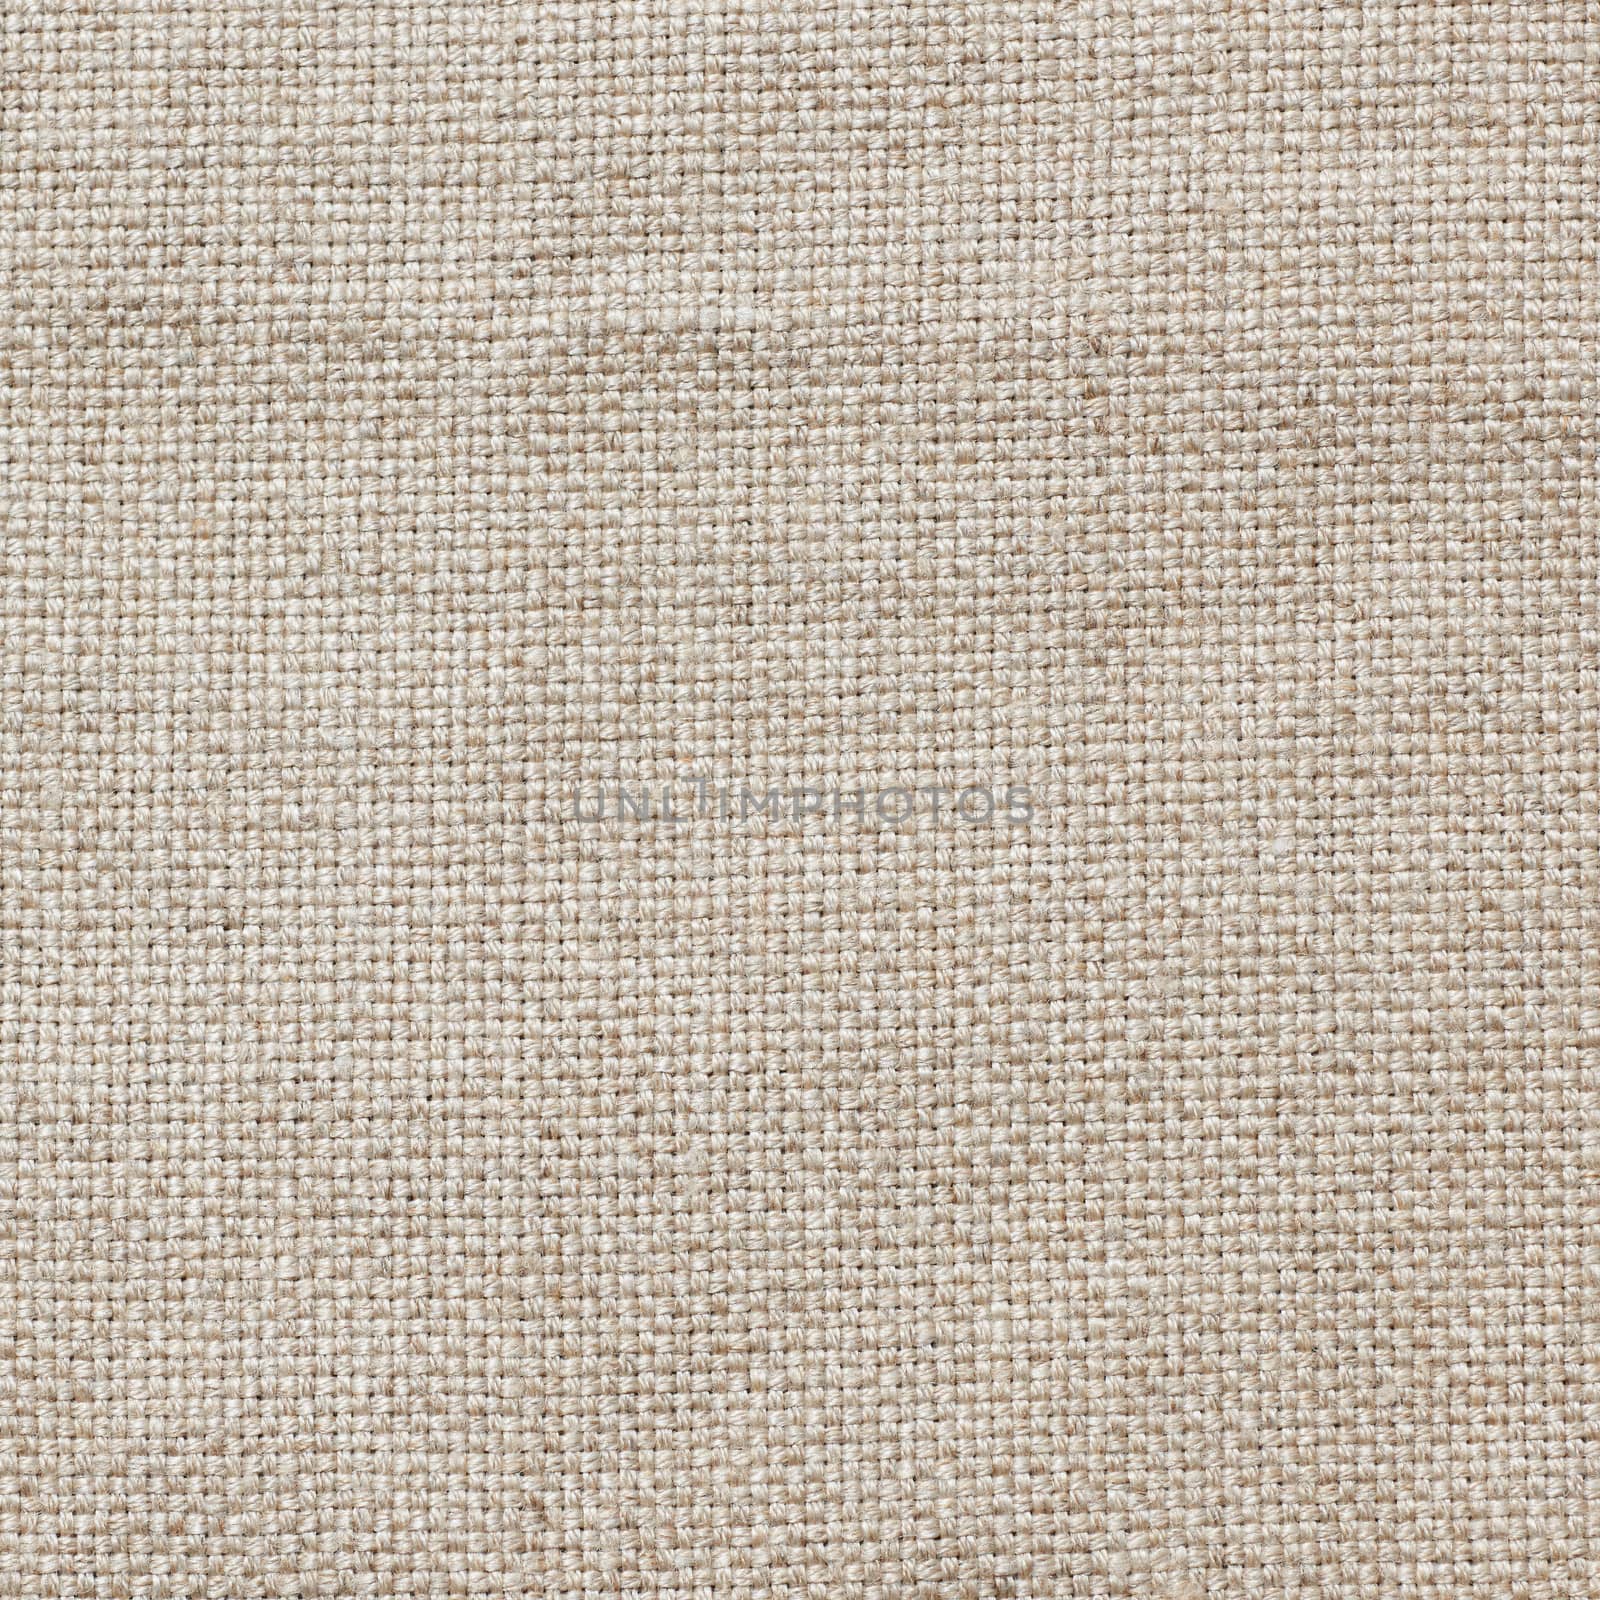 Linen fabric by ecobo